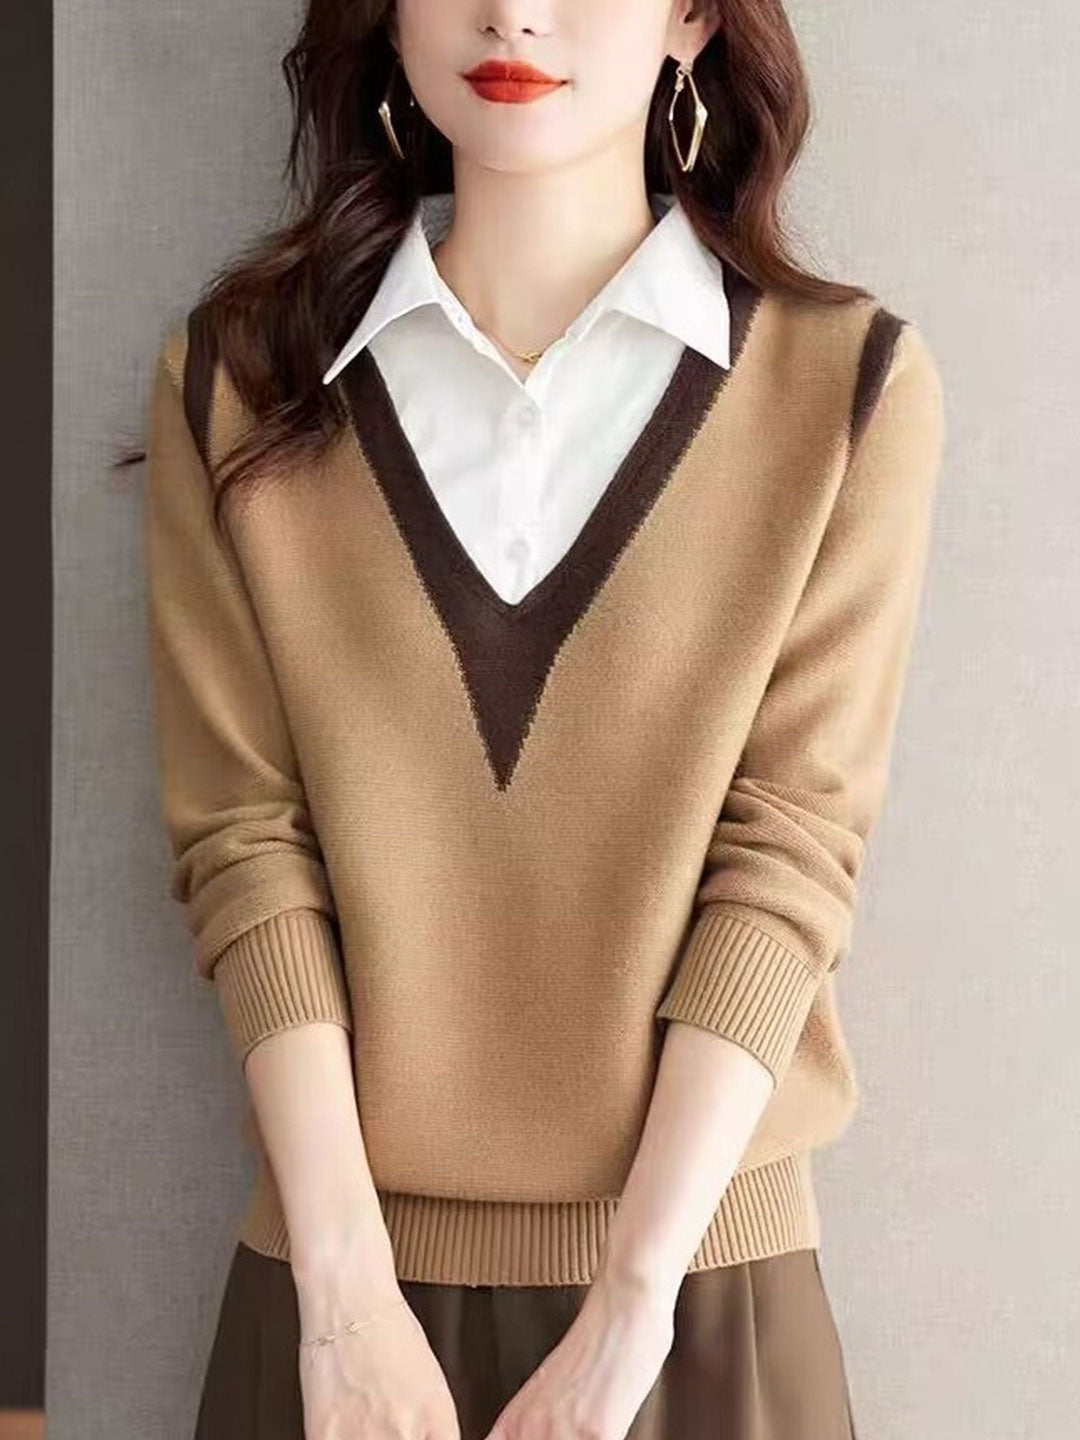 Ava Casual Contrast Color Shirt Collar Knitted Sweater